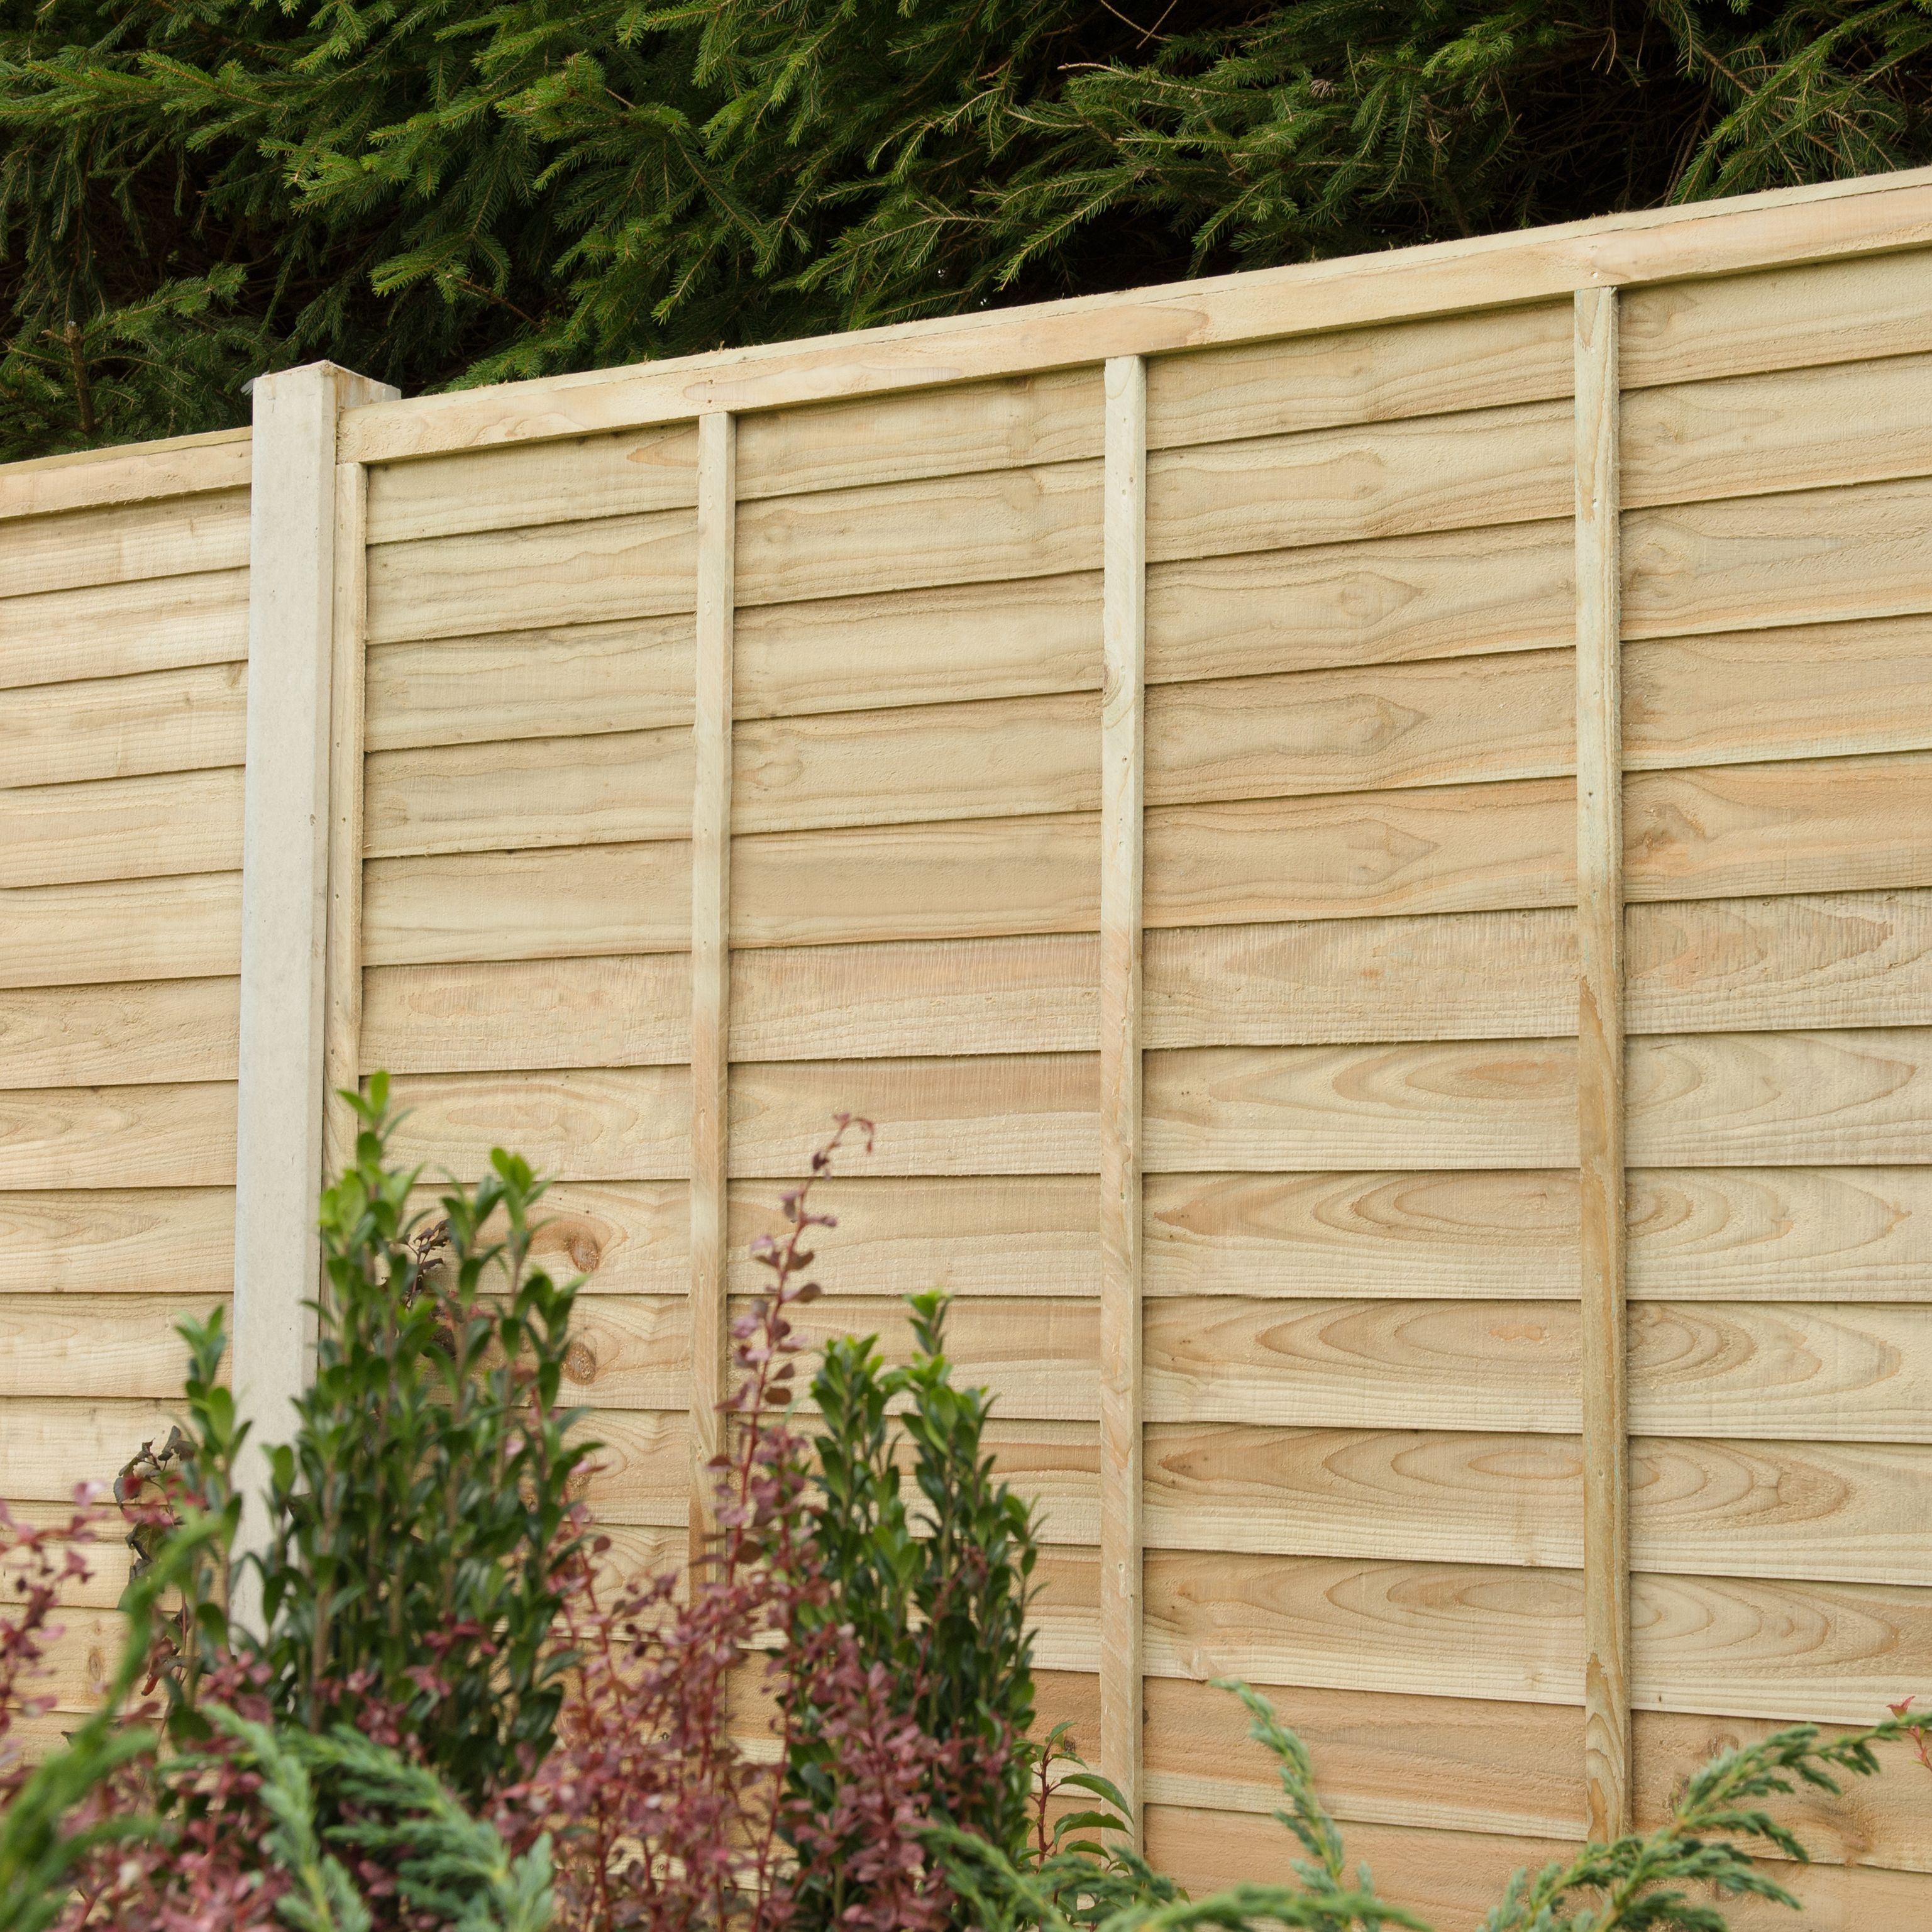 Premier Overlap Lap Pressure treated 5ft Wooden Fence panel (W)1.83m (H)1.52m, Pack of 5